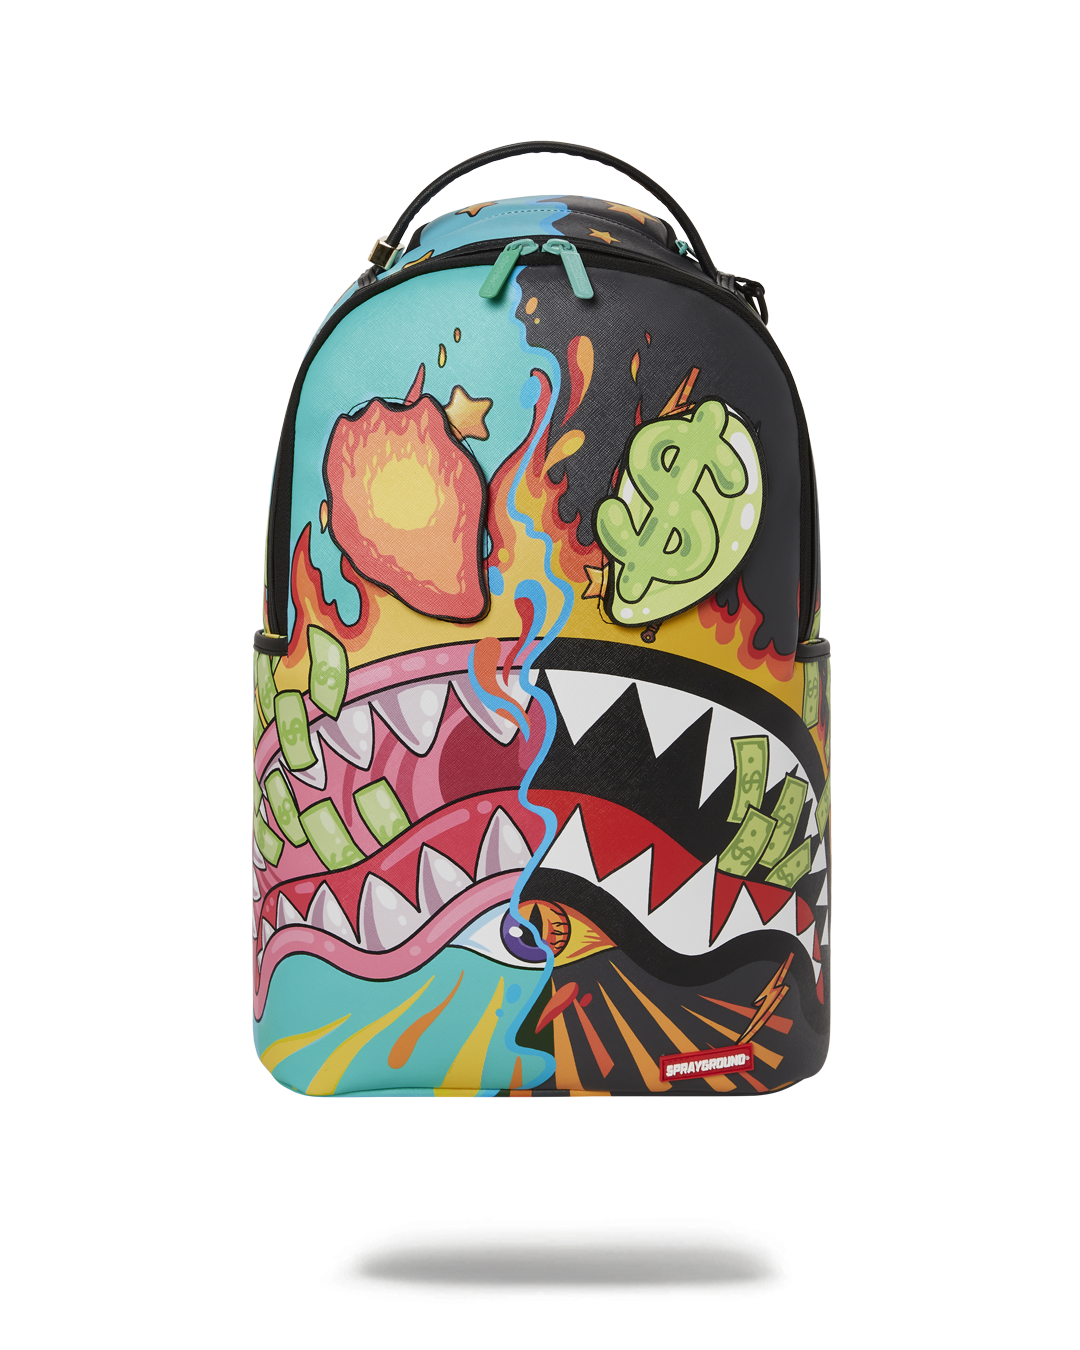 SPRAYGROUND® BACKPACK DAZED & SHARK DOUBLE LIFE (WITH REMOVABLE EYE PATCHES)